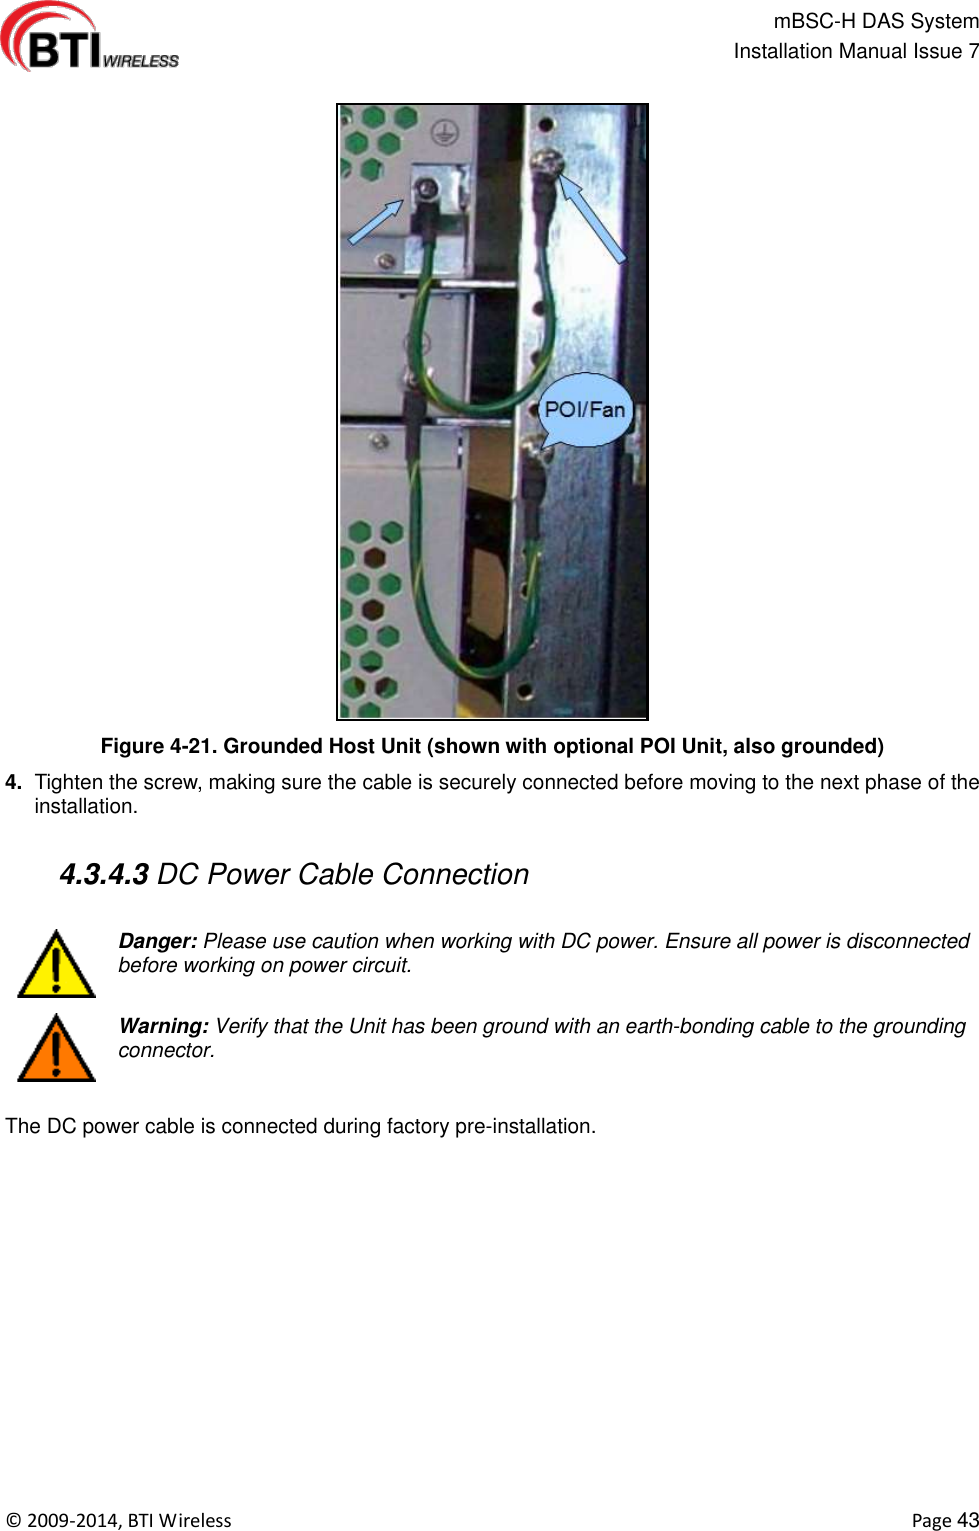                                                   mBSC-H DAS System   Installation Manual Issue 7  ©  2009-2014, BTI Wireless    Page 43  Figure 4-21. Grounded Host Unit (shown with optional POI Unit, also grounded) 4. Tighten the screw, making sure the cable is securely connected before moving to the next phase of the installation.   4.3.4.3 DC Power Cable Connection   Danger: Please use caution when working with DC power. Ensure all power is disconnected before working on power circuit.  Warning: Verify that the Unit has been ground with an earth-bonding cable to the grounding connector.  The DC power cable is connected during factory pre-installation.  